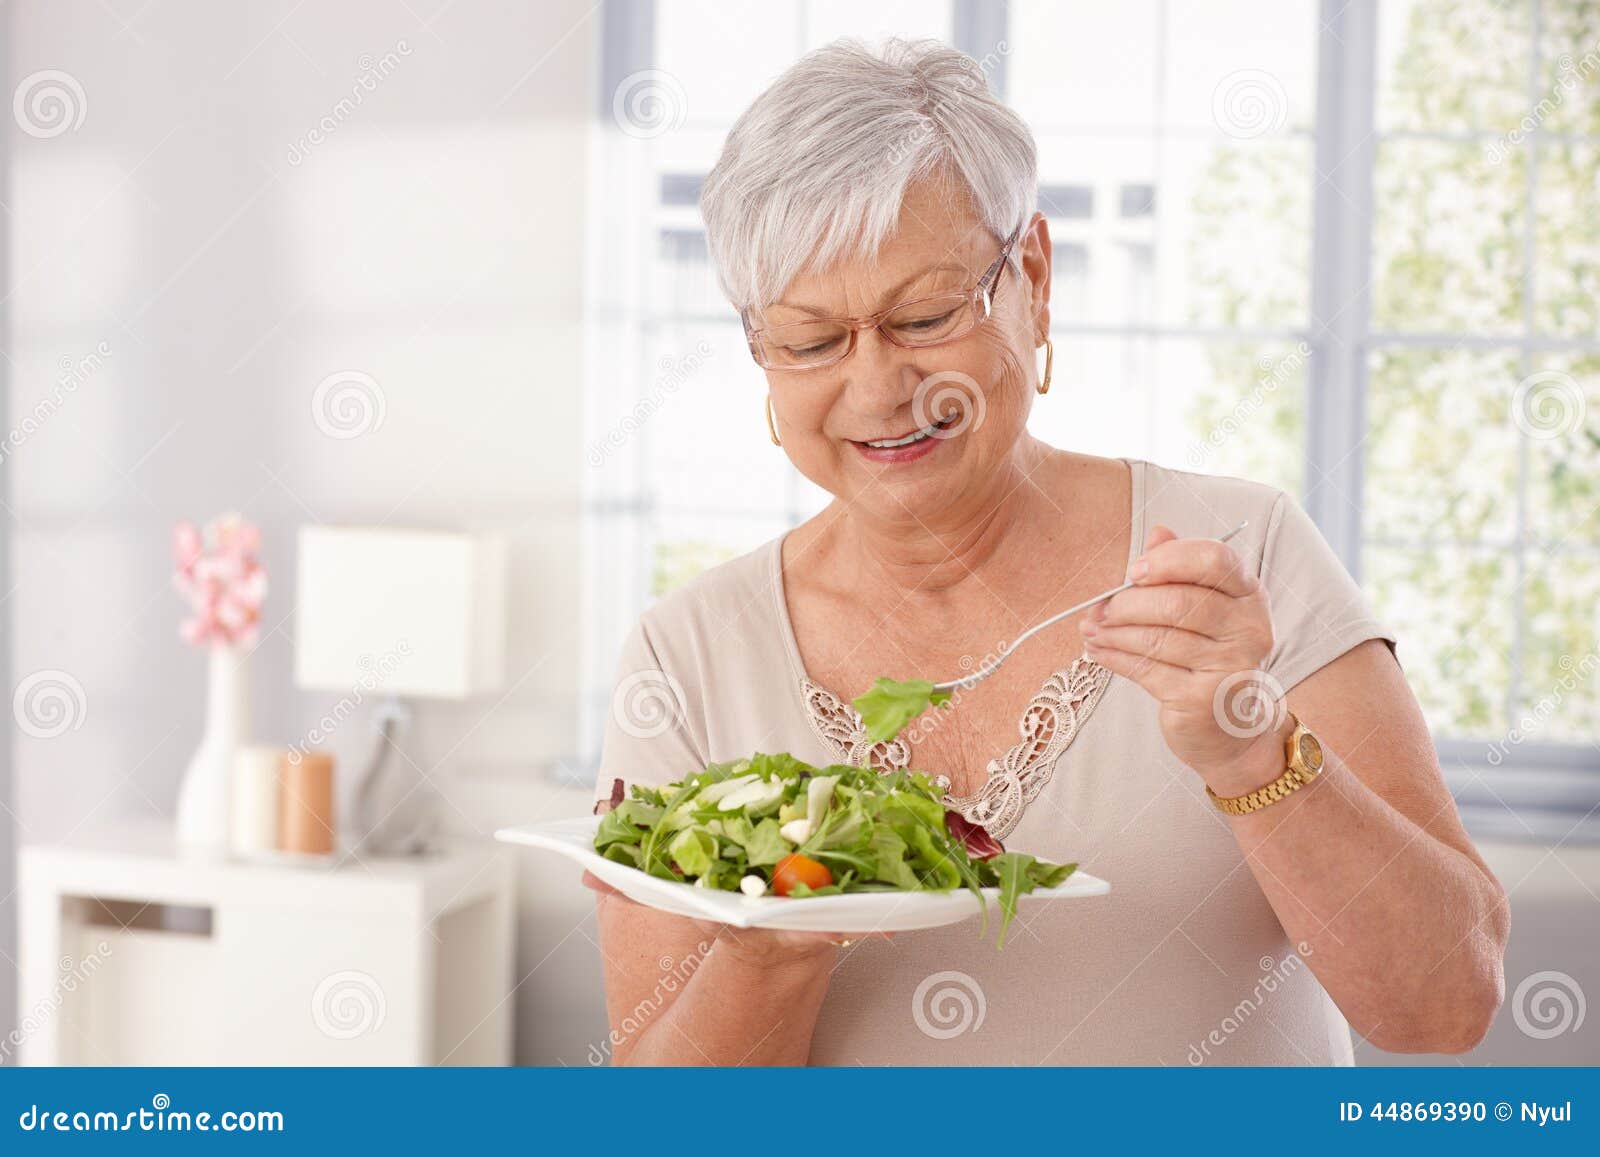 old lady eating green salad